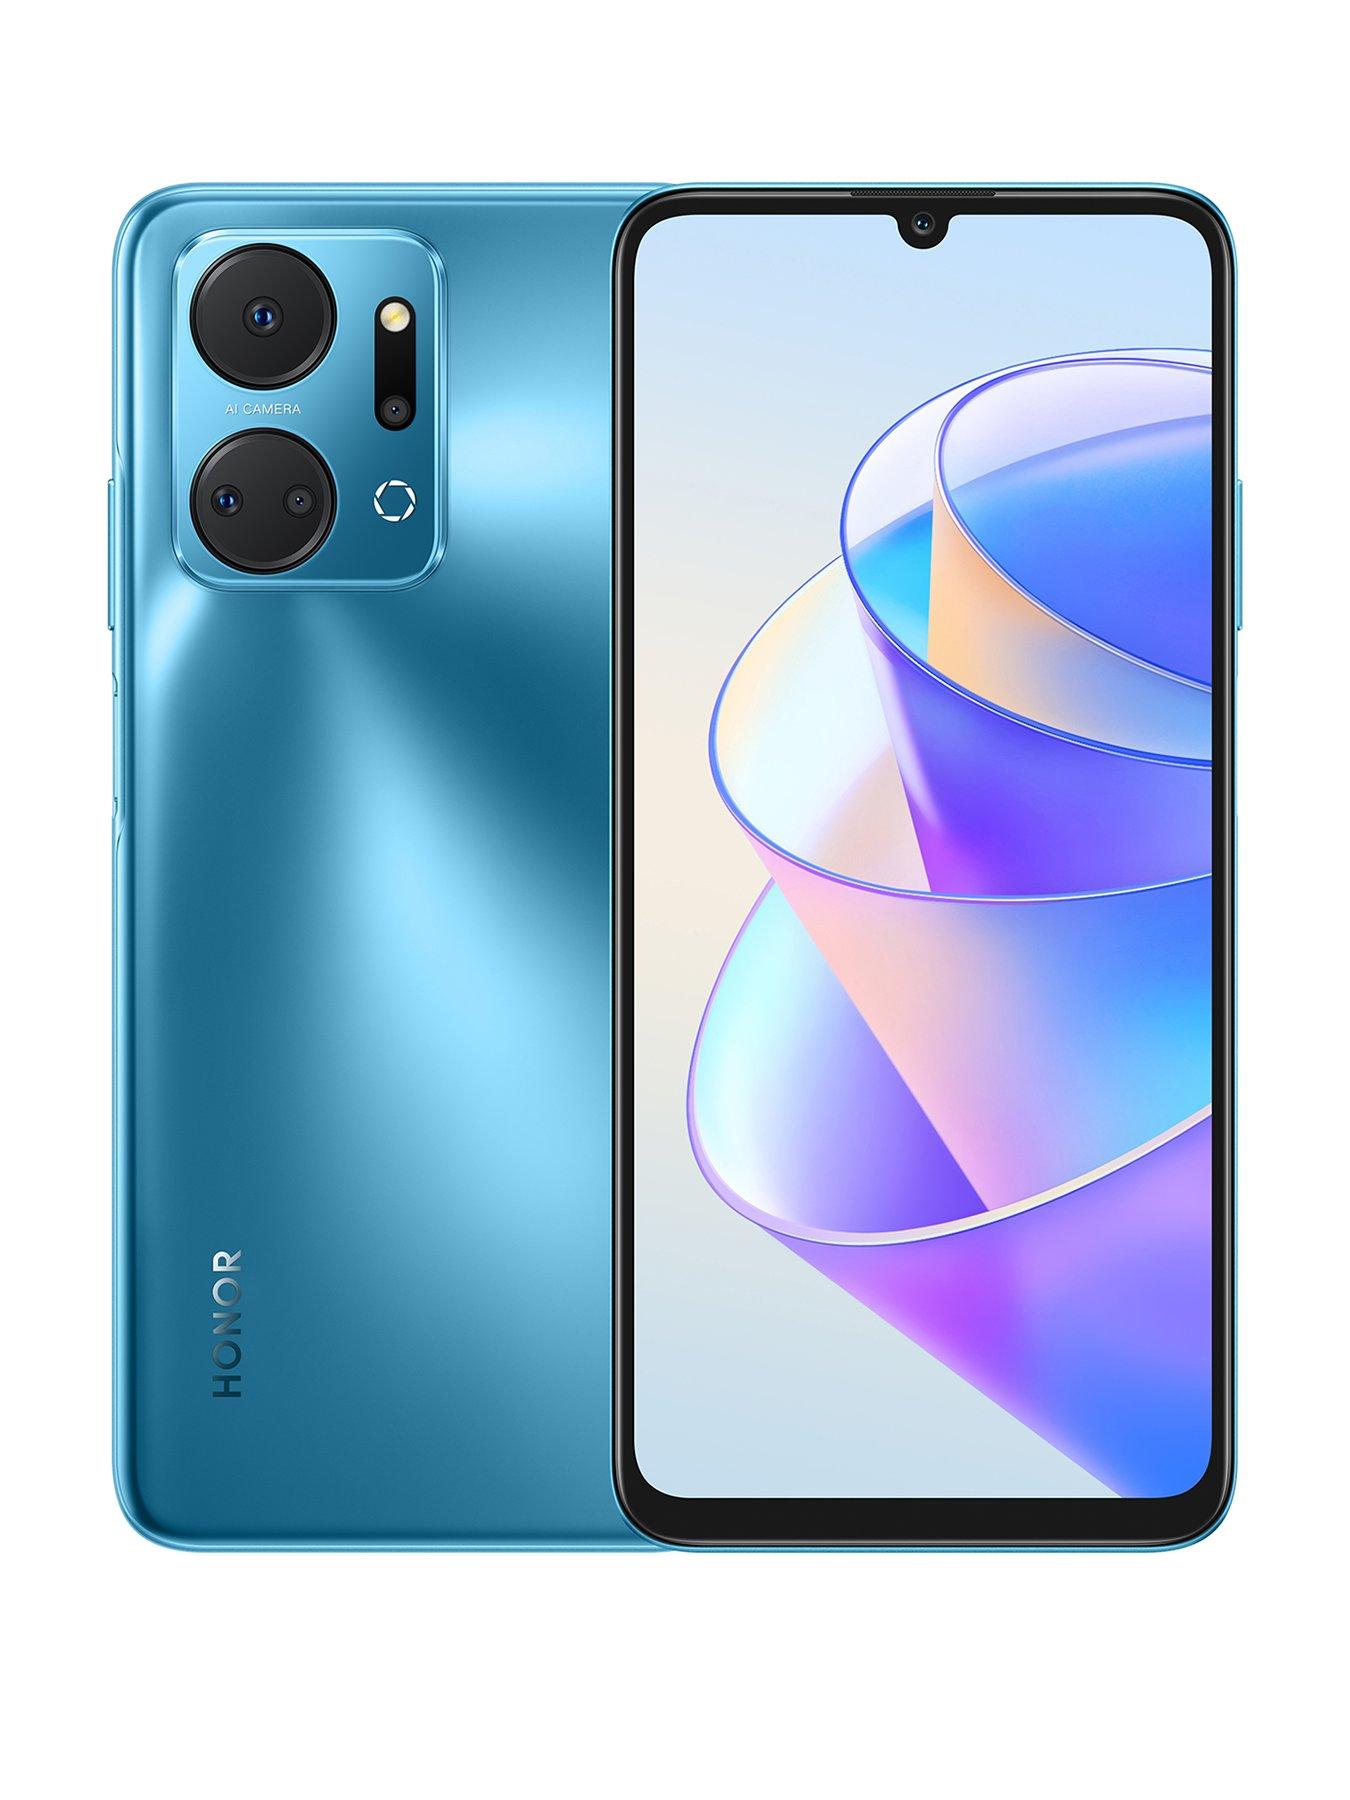 New Honor 70 Lite 5G smartphone launched in UK - Telecompaper